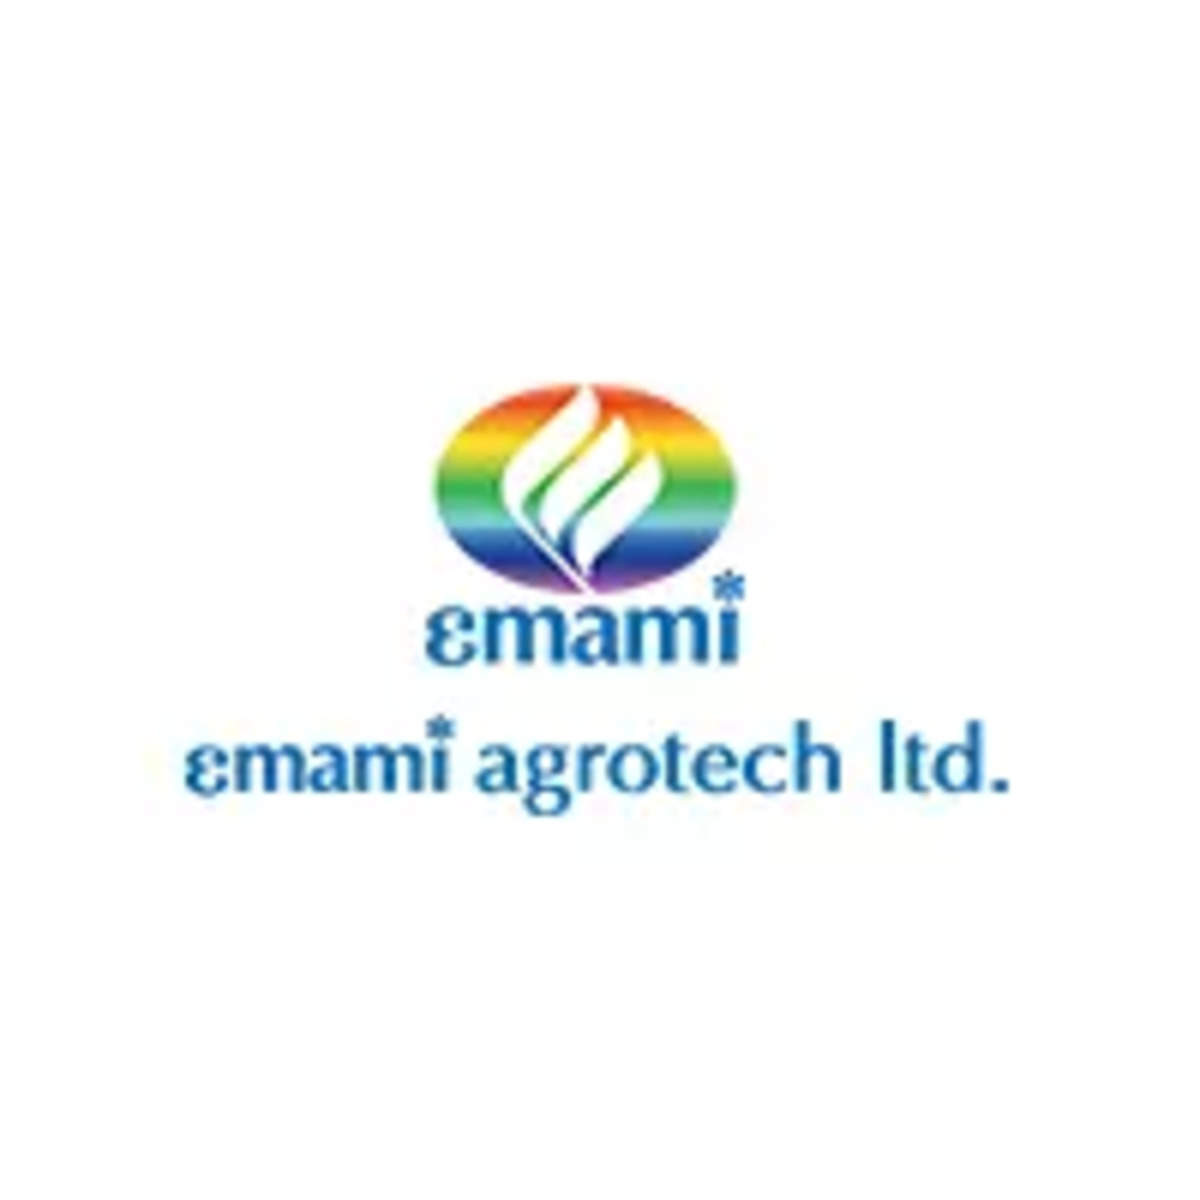 Dalmia Bharat Enters Race to Acquire Emami Cement